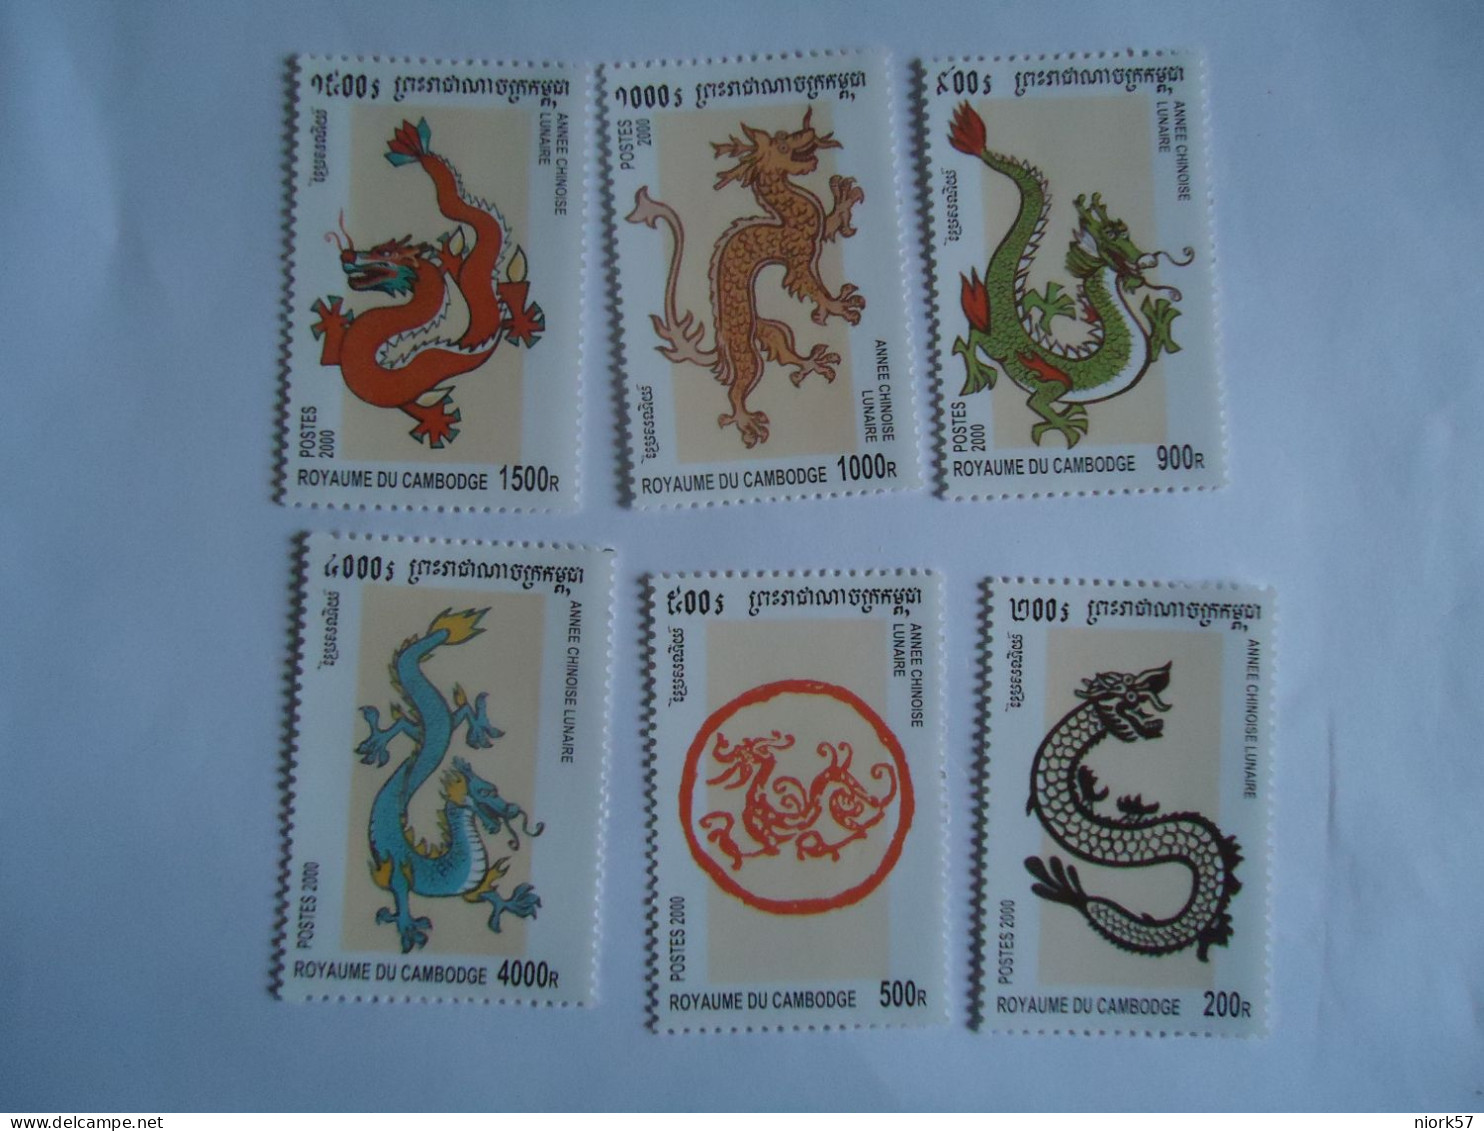 Cambodia  MNH   STAMPS   SET  6 Year Of The Dragon - Chinees Nieuwjaar